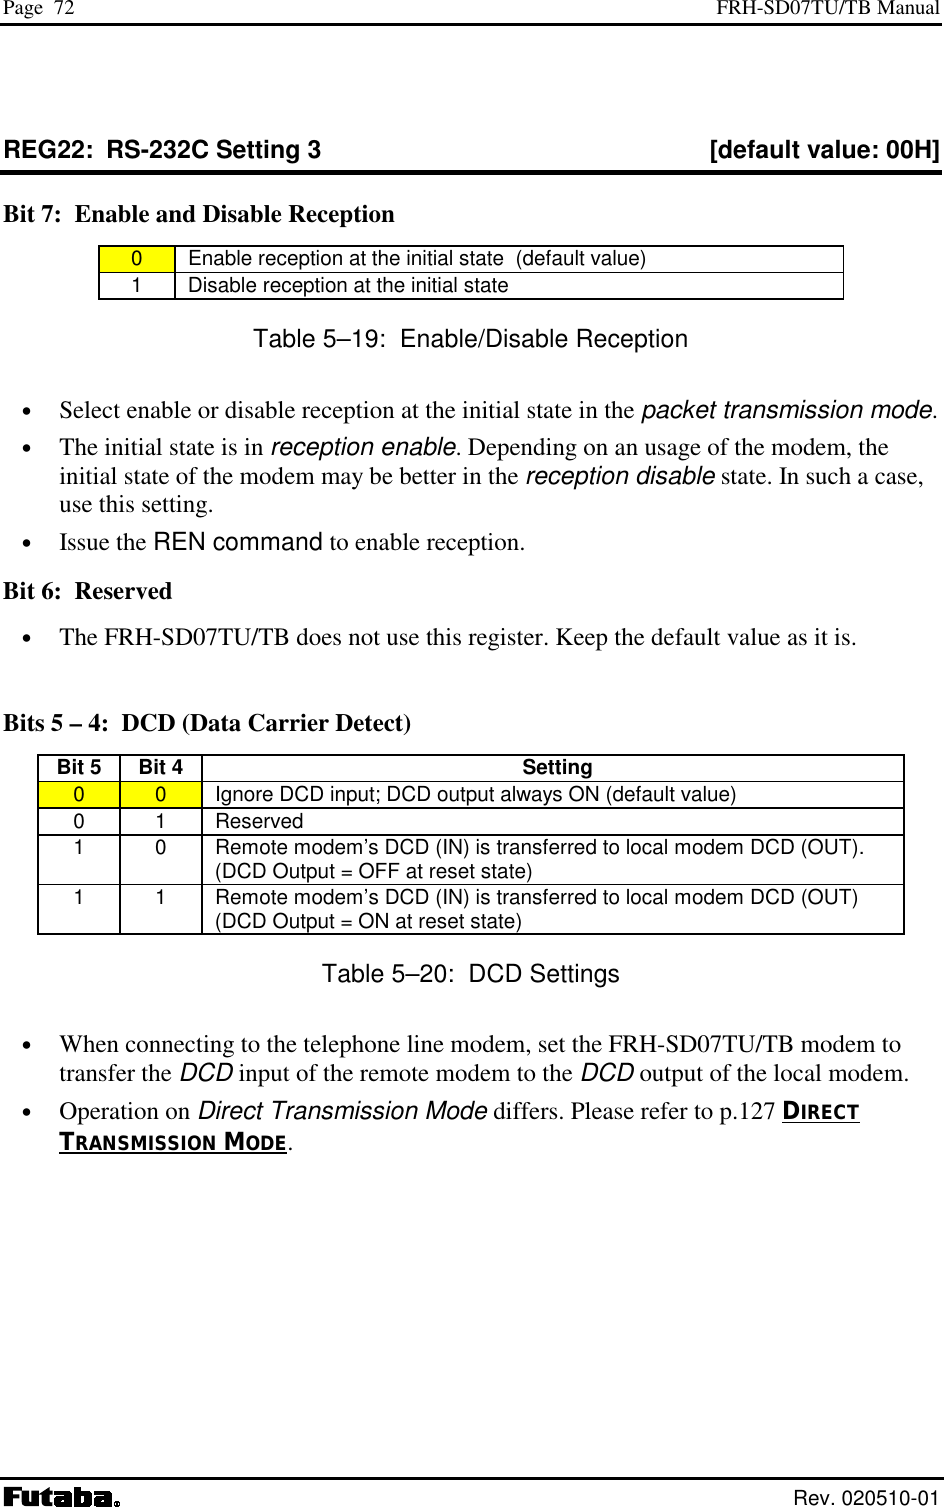 Page  72  FRH-SD07TU/TB Manual  Rev. 020510-01 REG22:  RS-232C Setting 3  [default value: 00H] Bit 7:  Enable and Disable Reception 0   Enable reception at the initial state  (default value) 1   Disable reception at the initial state  Table 5–19:  Enable/Disable Reception •  Select enable or disable reception at the initial state in the packet transmission mode. •  The initial state is in reception enable. Depending on an usage of the modem, the initial state of the modem may be better in the reception disable state. In such a case, use this setting. •  Issue the REN command to enable reception. Bit 6:  Reserved •  The FRH-SD07TU/TB does not use this register. Keep the default value as it is.  Bits 5 – 4:  DCD (Data Carrier Detect) Bit 5  Bit 4    Setting 0  0   Ignore DCD input; DCD output always ON (default value) 0 1  Reserved 1  0   Remote modem’s DCD (IN) is transferred to local modem DCD (OUT). (DCD Output = OFF at reset state) 1  1   Remote modem’s DCD (IN) is transferred to local modem DCD (OUT) (DCD Output = ON at reset state) Table 5–20:  DCD Settings •  When connecting to the telephone line modem, set the FRH-SD07TU/TB modem to transfer the DCD input of the remote modem to the DCD output of the local modem. •  Operation on Direct Transmission Mode differs. Please refer to p.127 DIRECT TRANSMISSION MODE. 